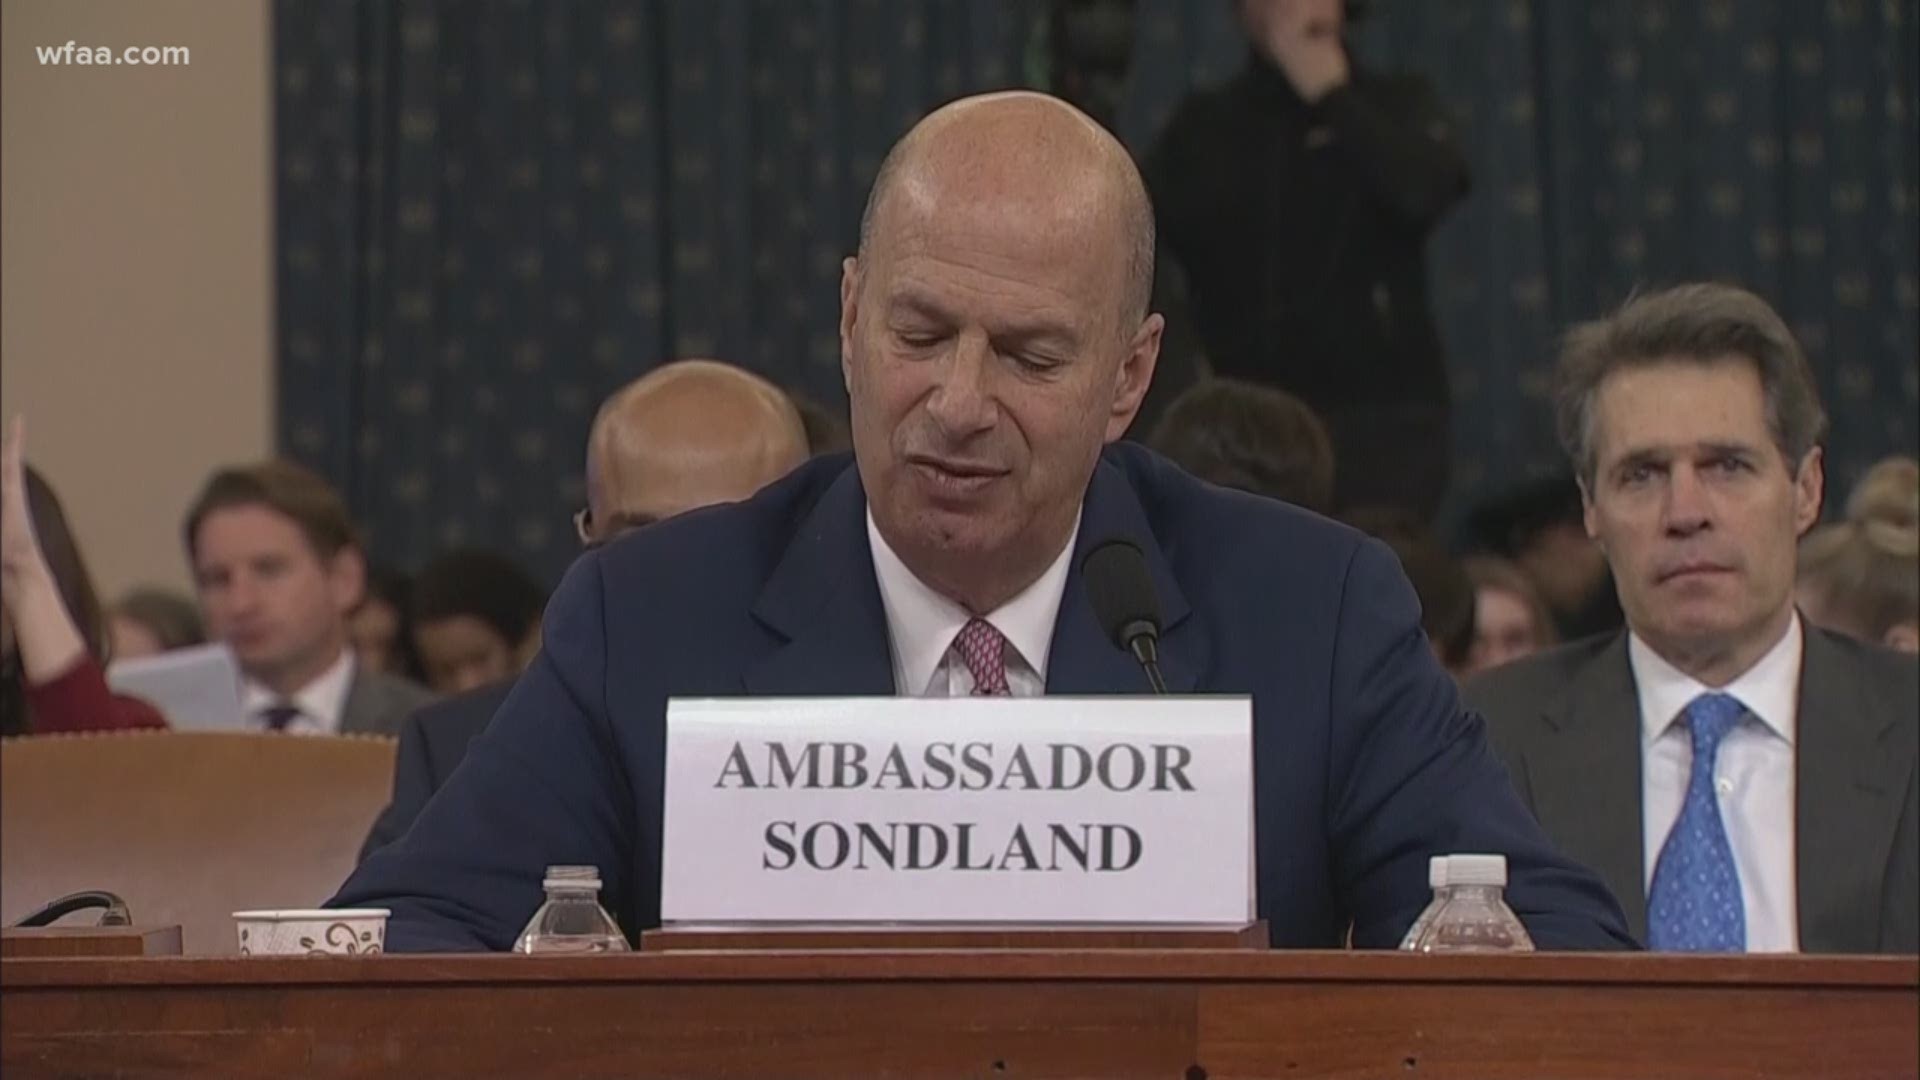 Sondland is one of the most anticipated witnesses in the House impeachment inquiry.